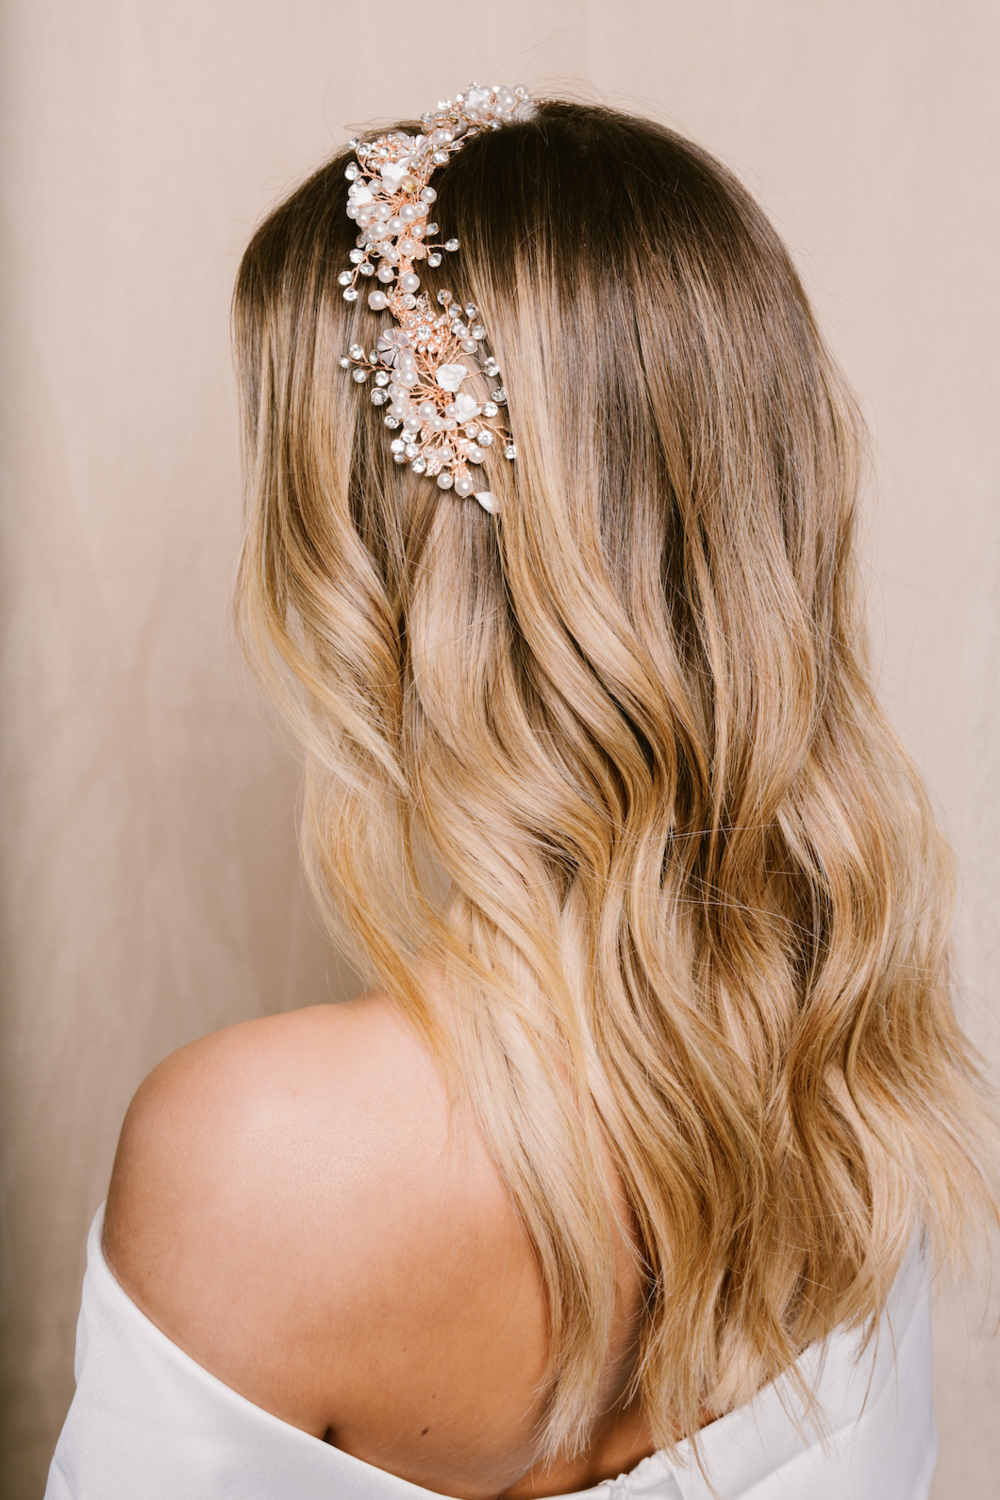 10 Bridal Hair Pieces And Accessories To Rock Straight Out Of Lockdown! —  Red Event Online Wedding Planning Fayres | Hp435 Wedding Tiara Crystal  Bridal Headband Women Hair Crown Bridal Hair Accessories